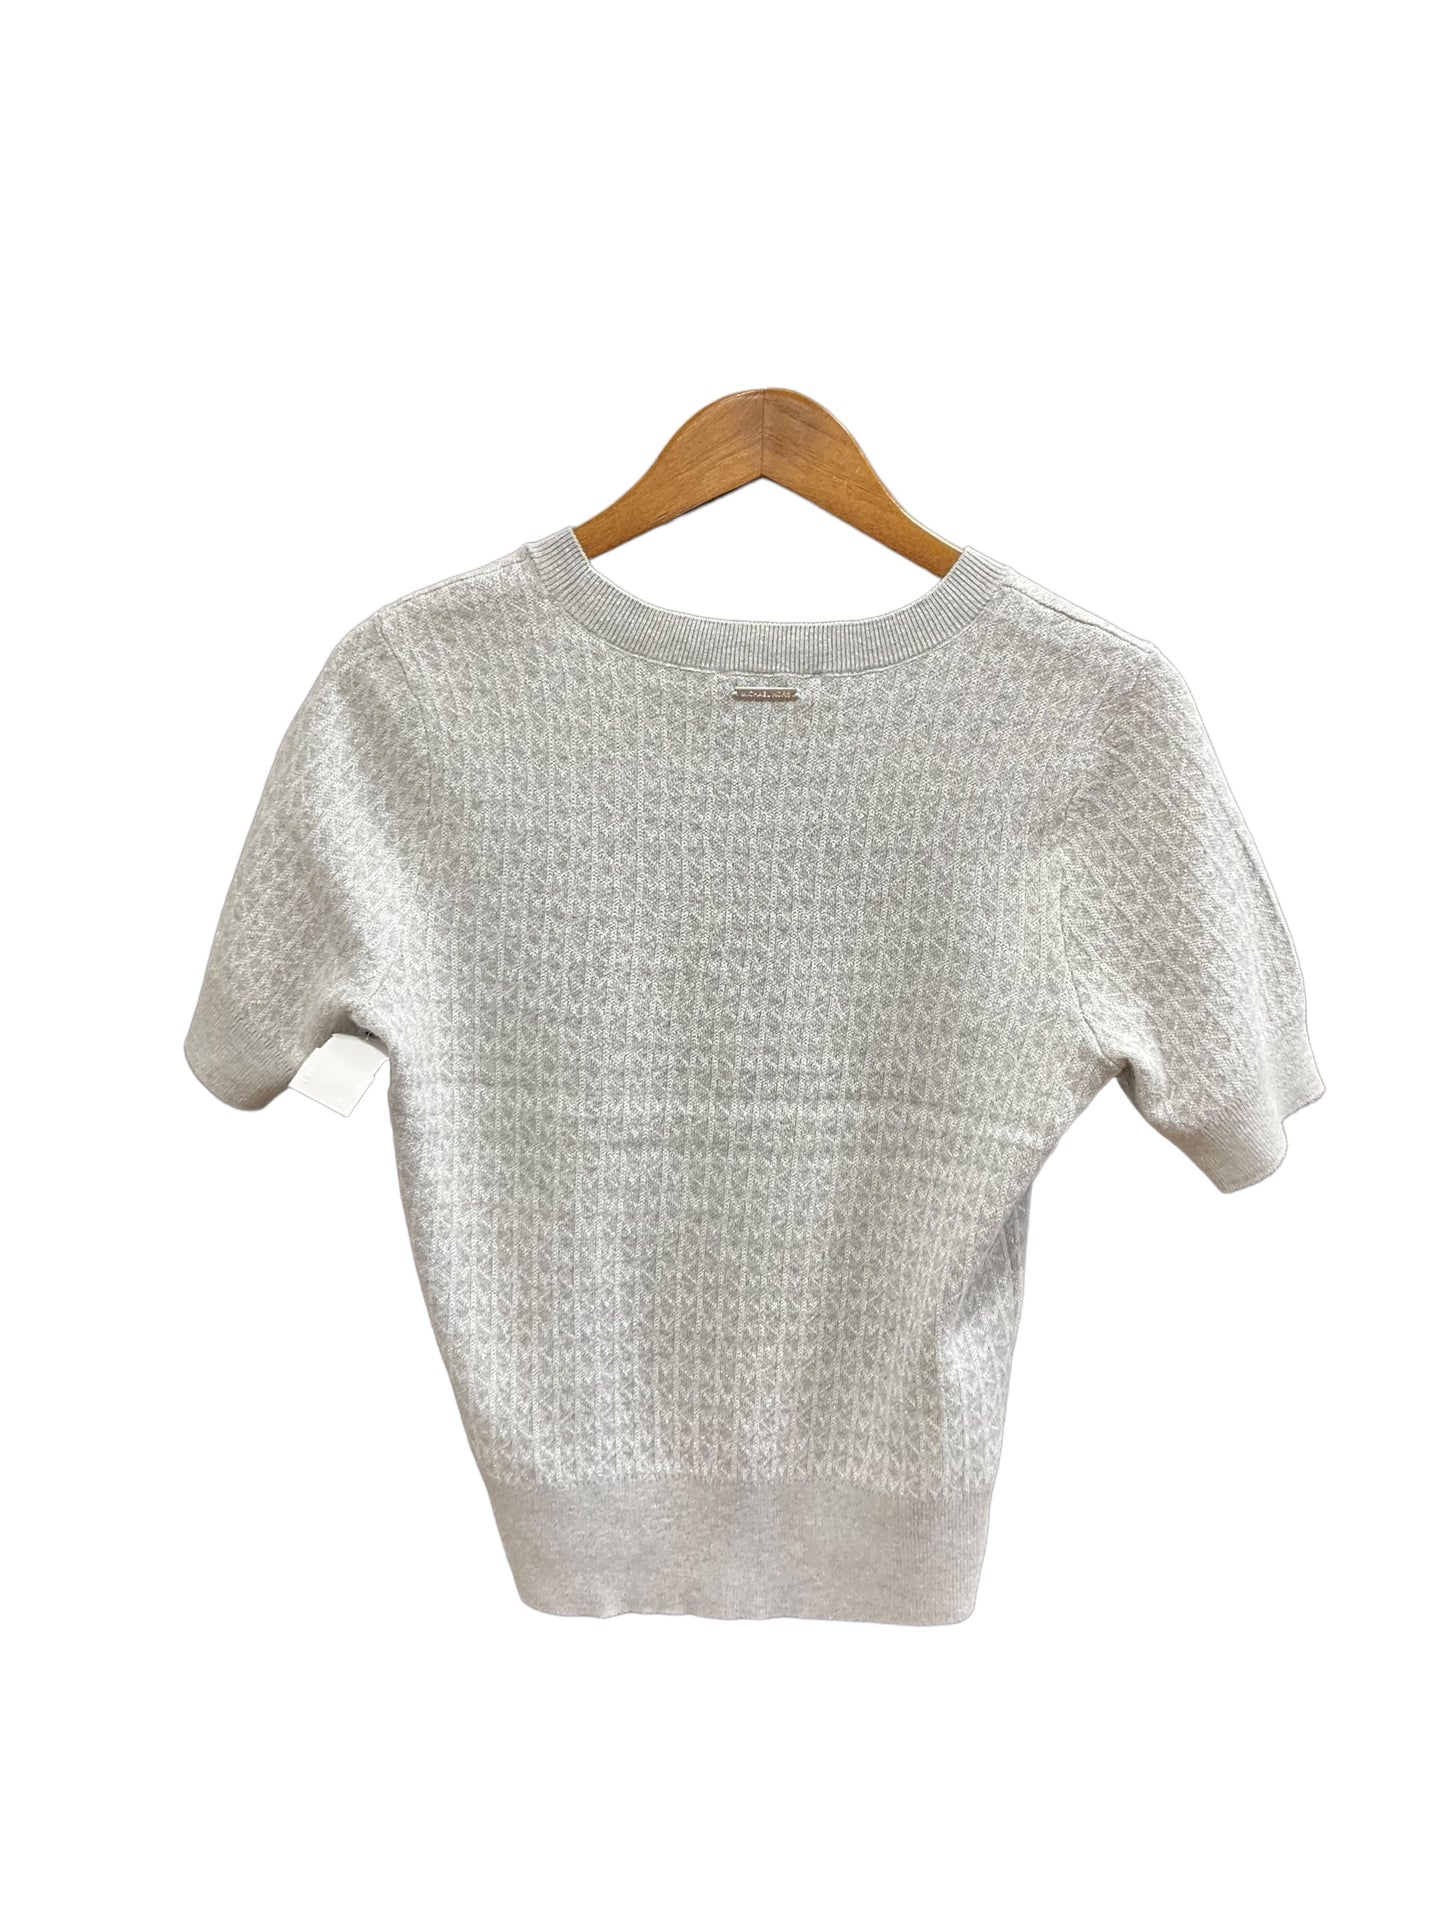 Sweater By Michael By Michael Kors  Size: S